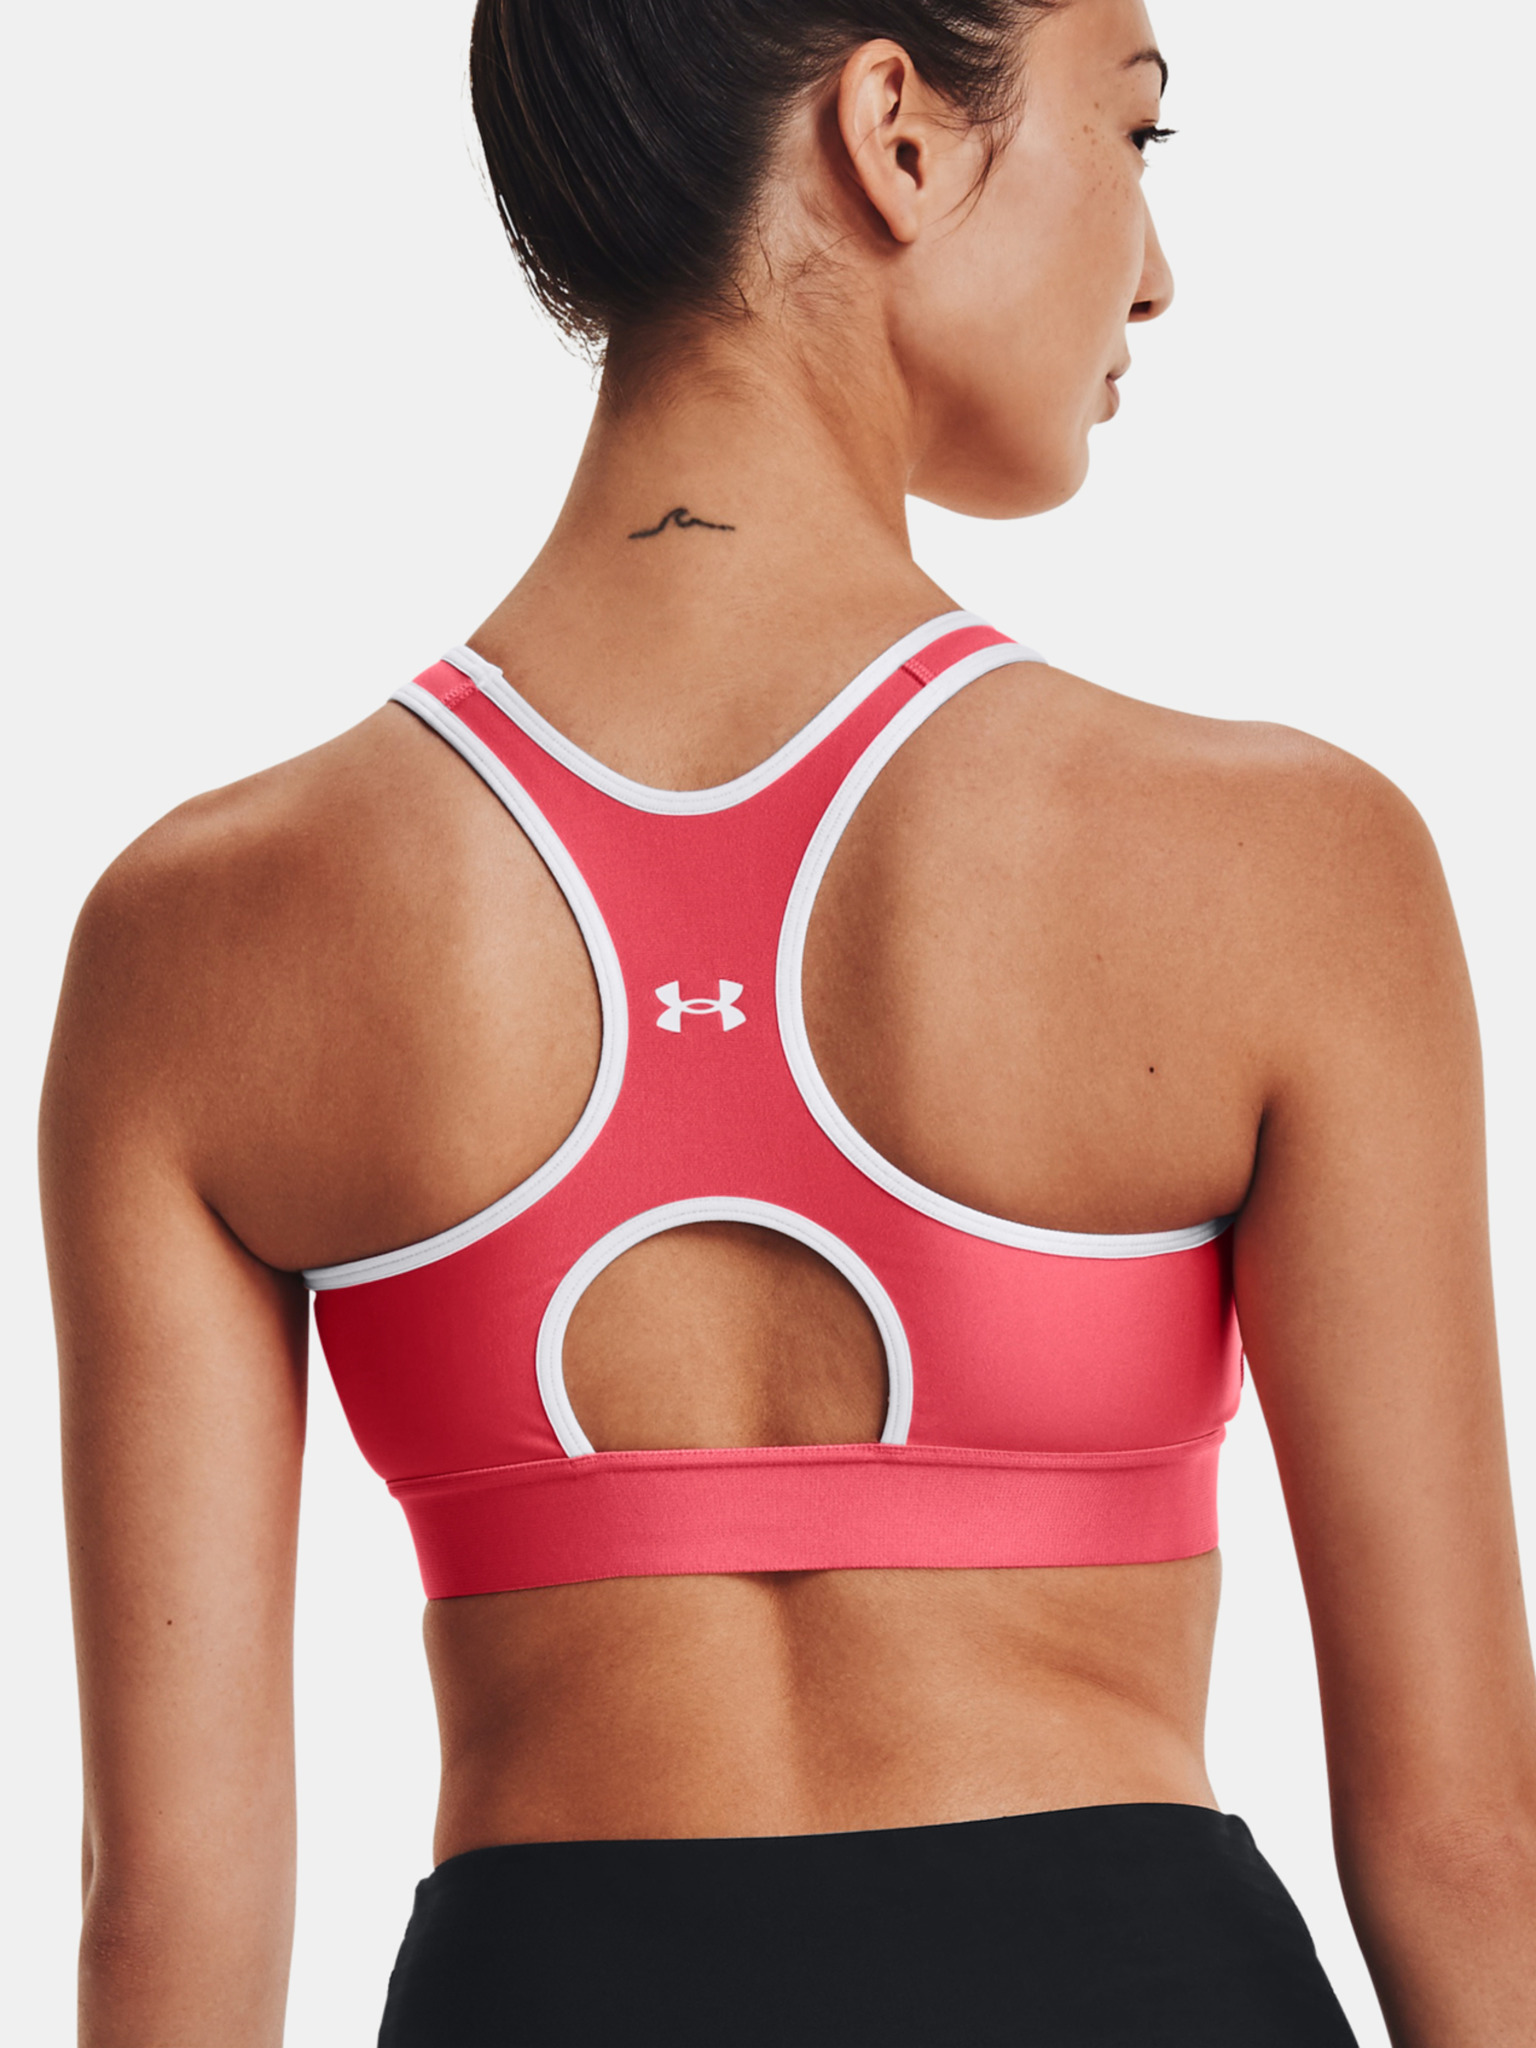 Under Armour Mid Keyhole Graphic Sports Bra, White